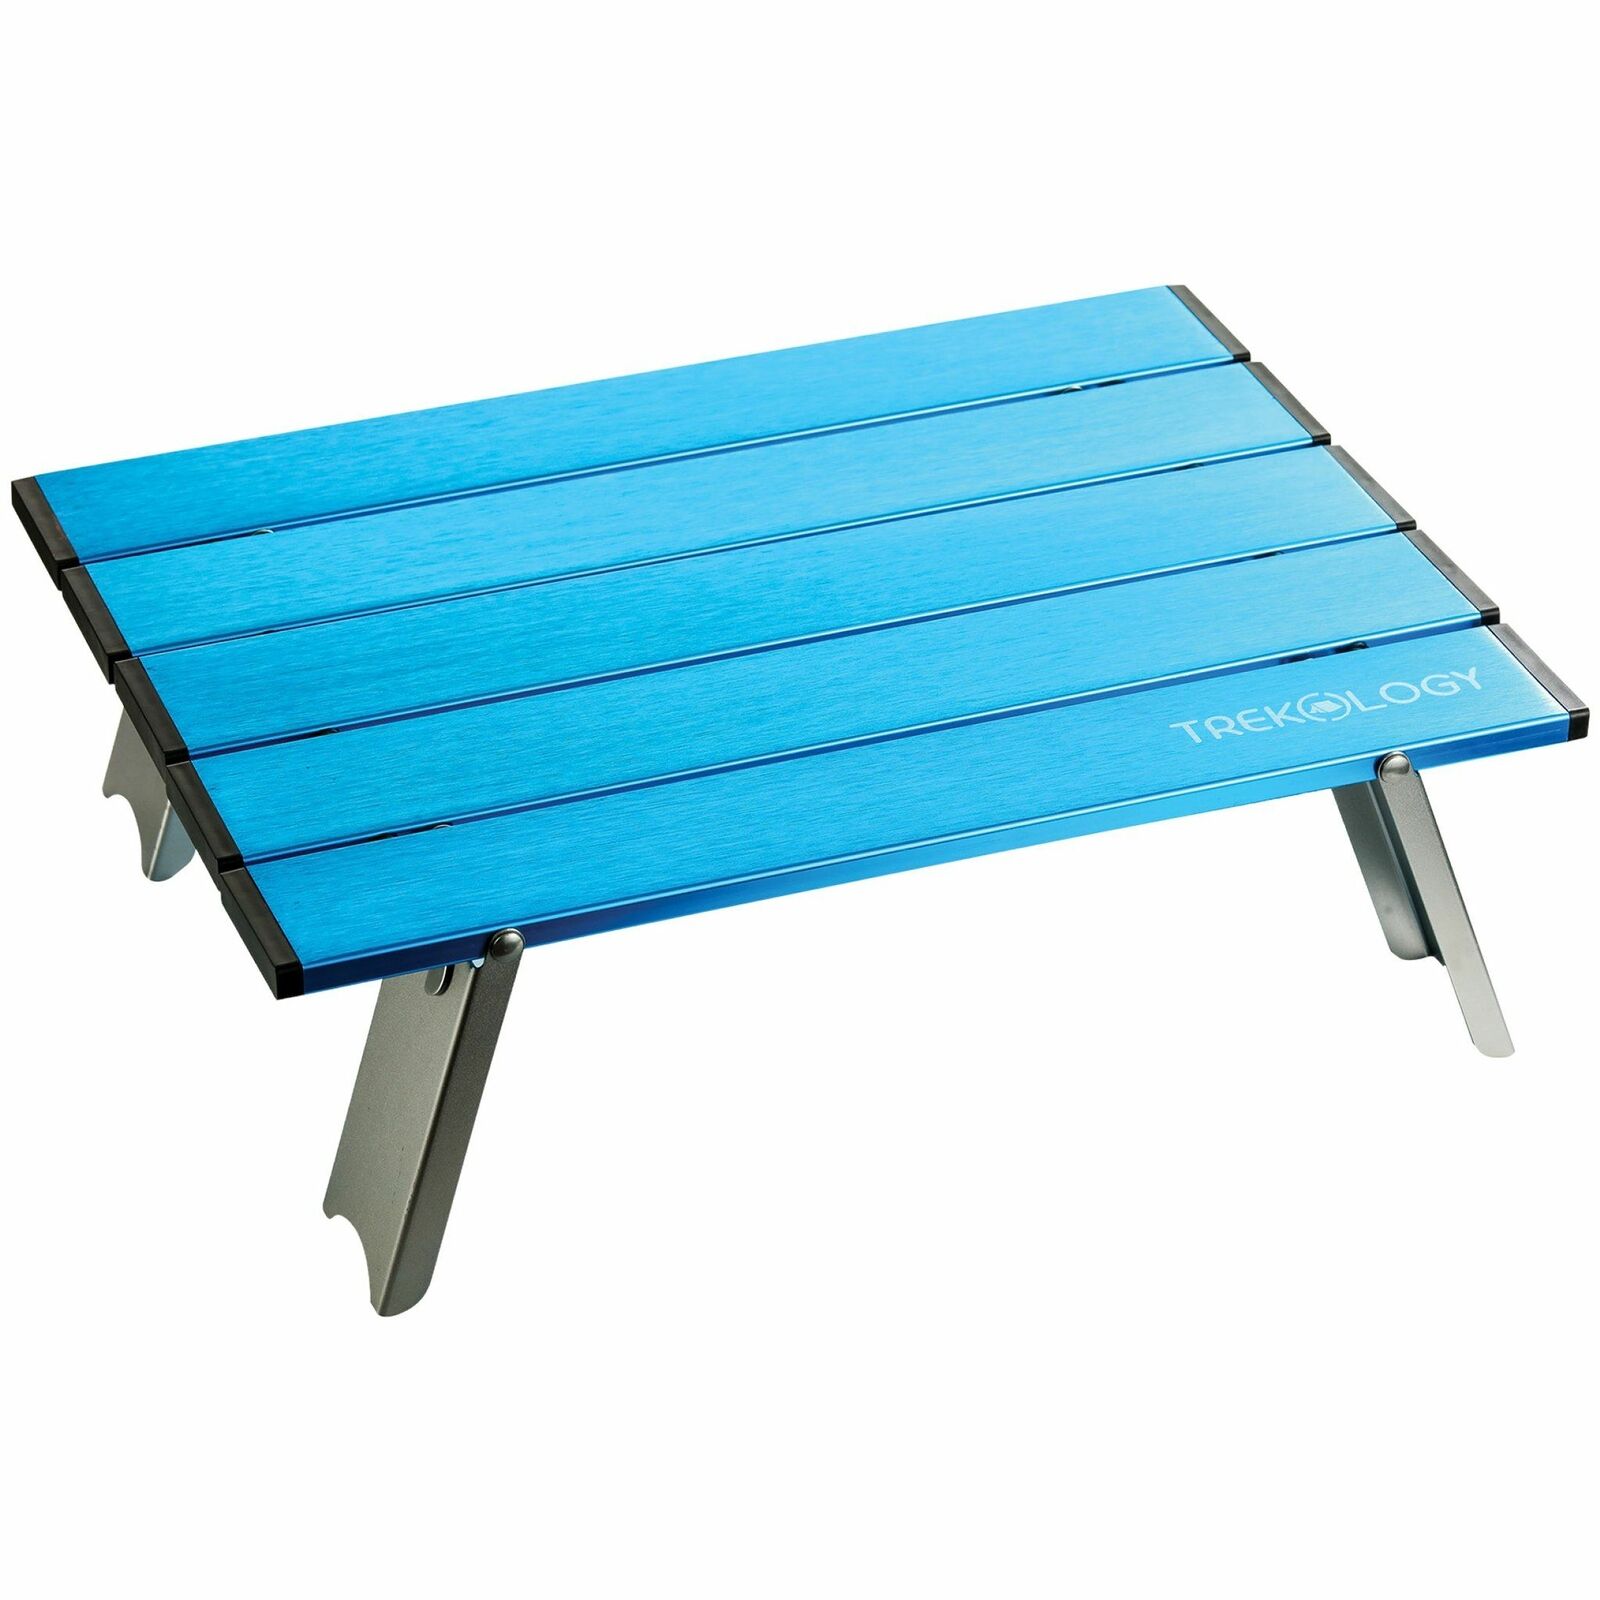 Personal Beach Table for Sand, Collapsible Small Portable Folding Compact Tables